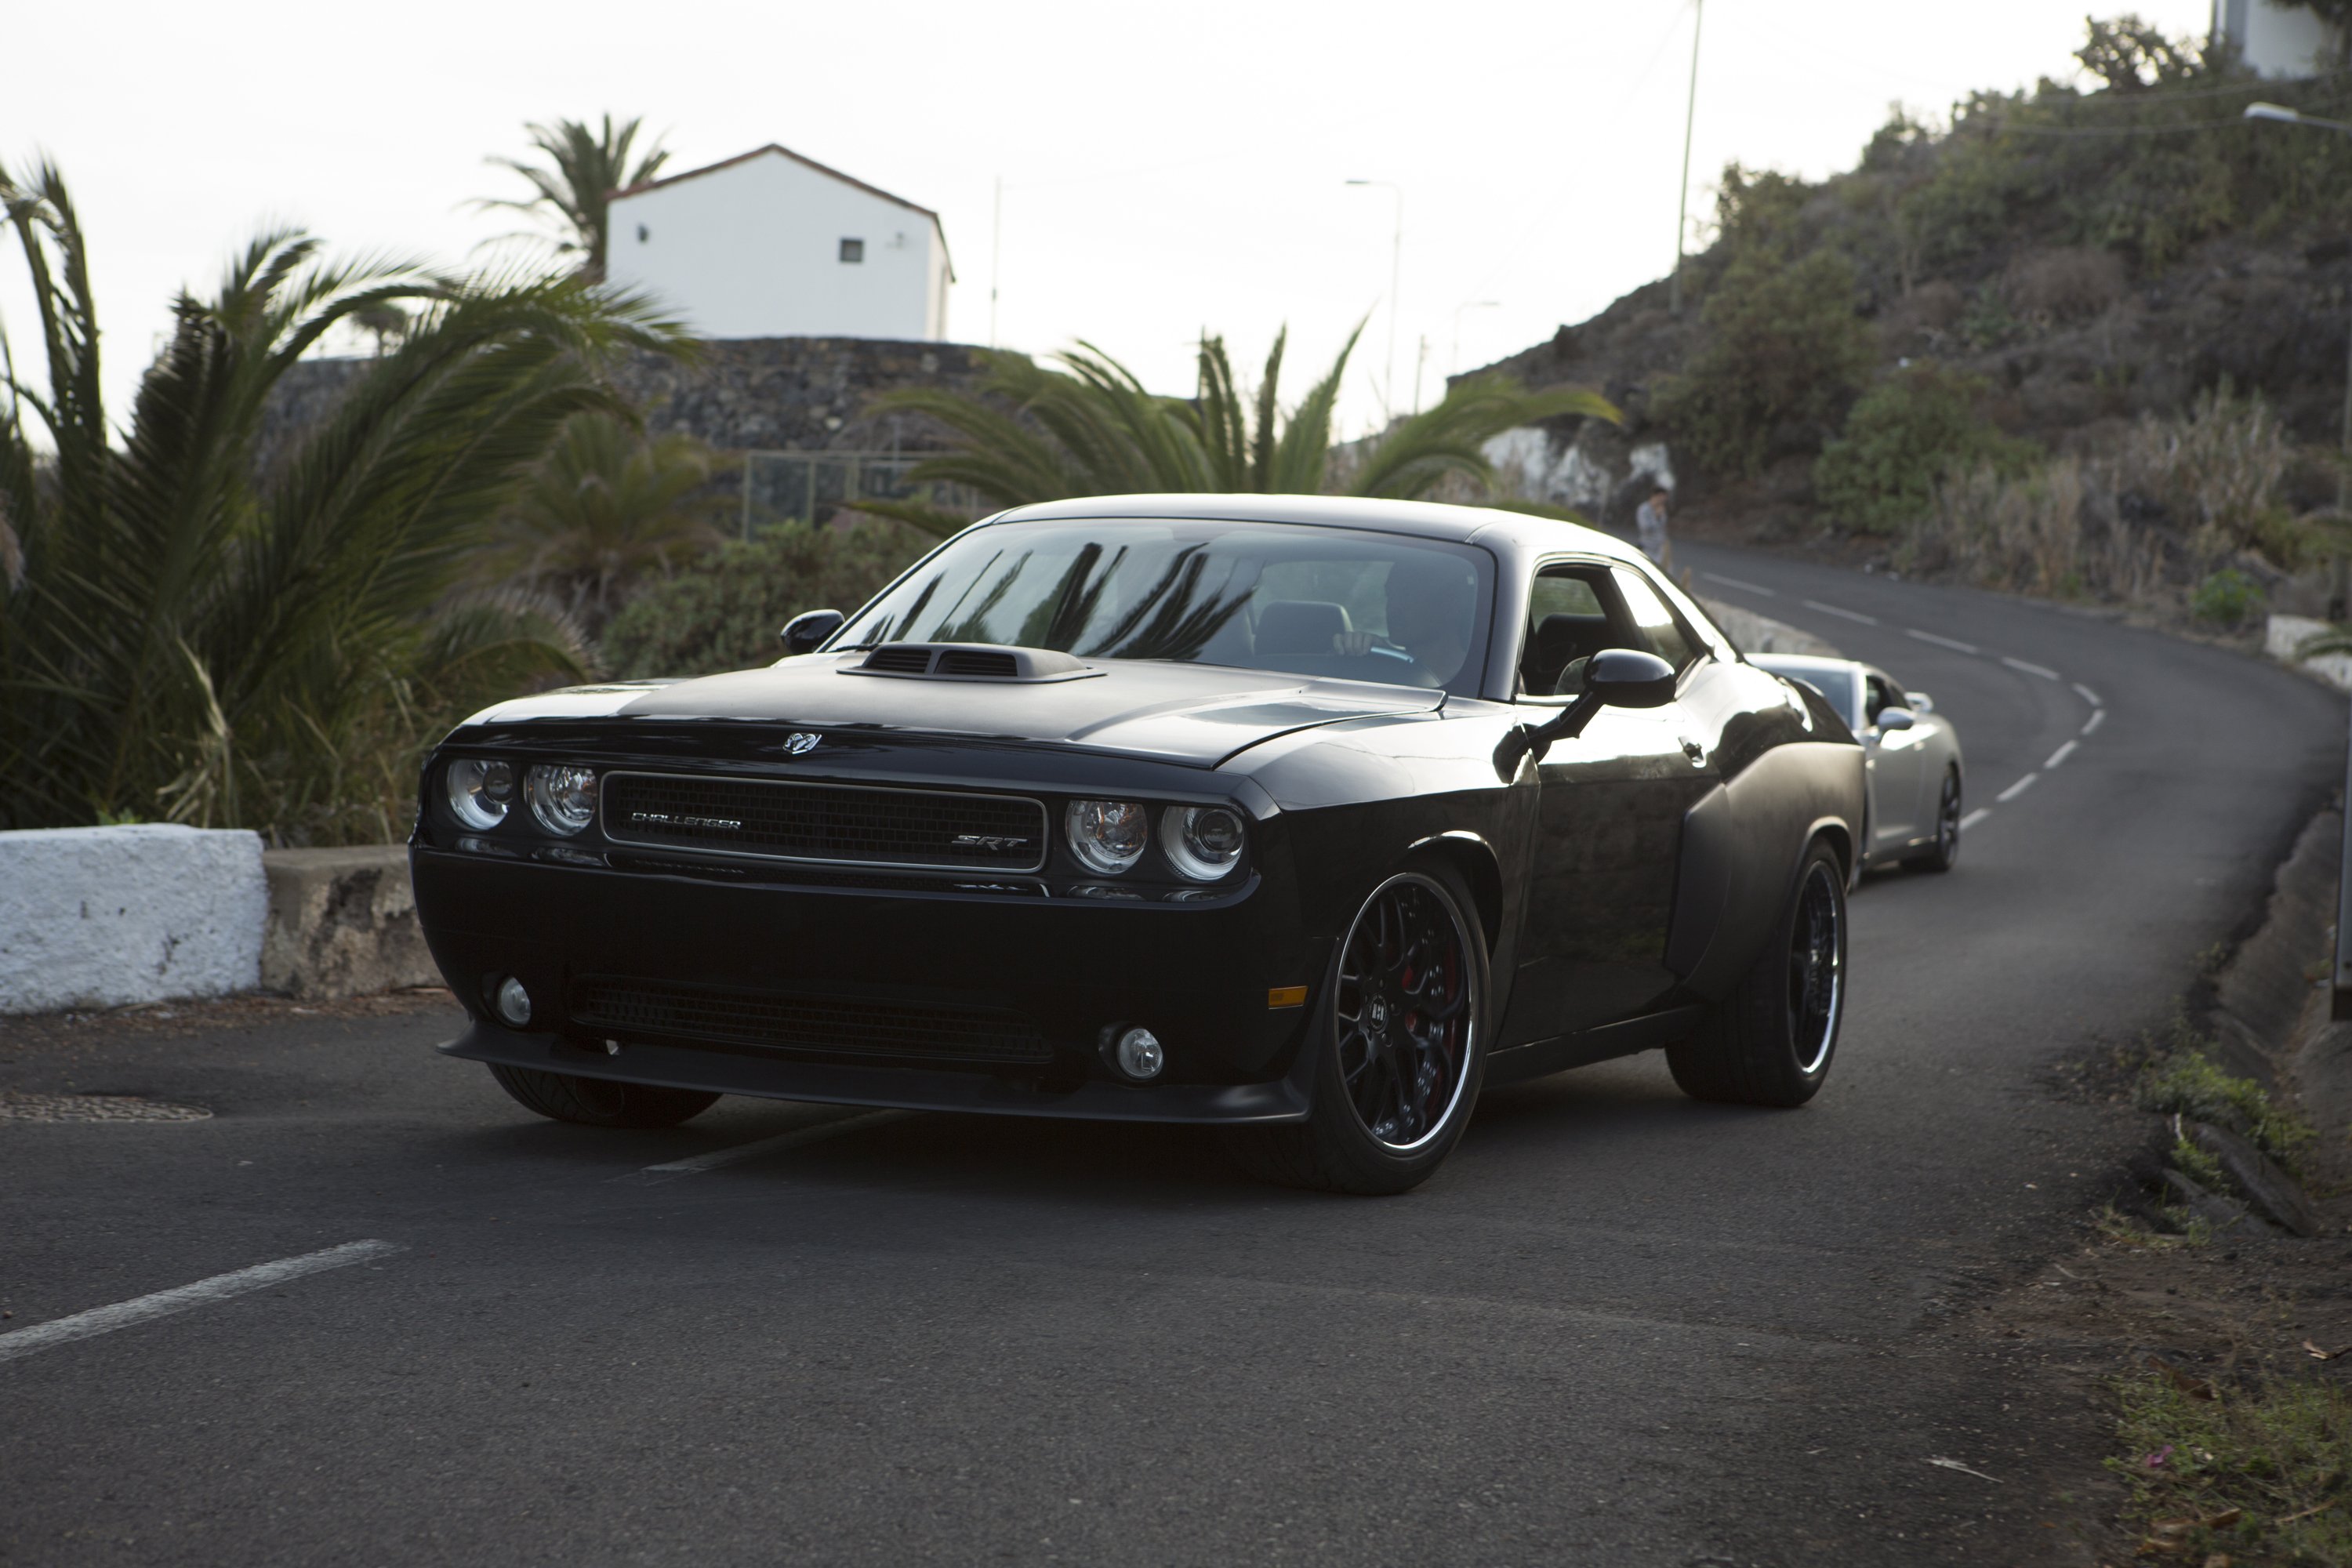 2012 Dodge Challenger Srt8 392 Fast Furious Tuning Hot Rod Rods Muscle Wallpapers Hd